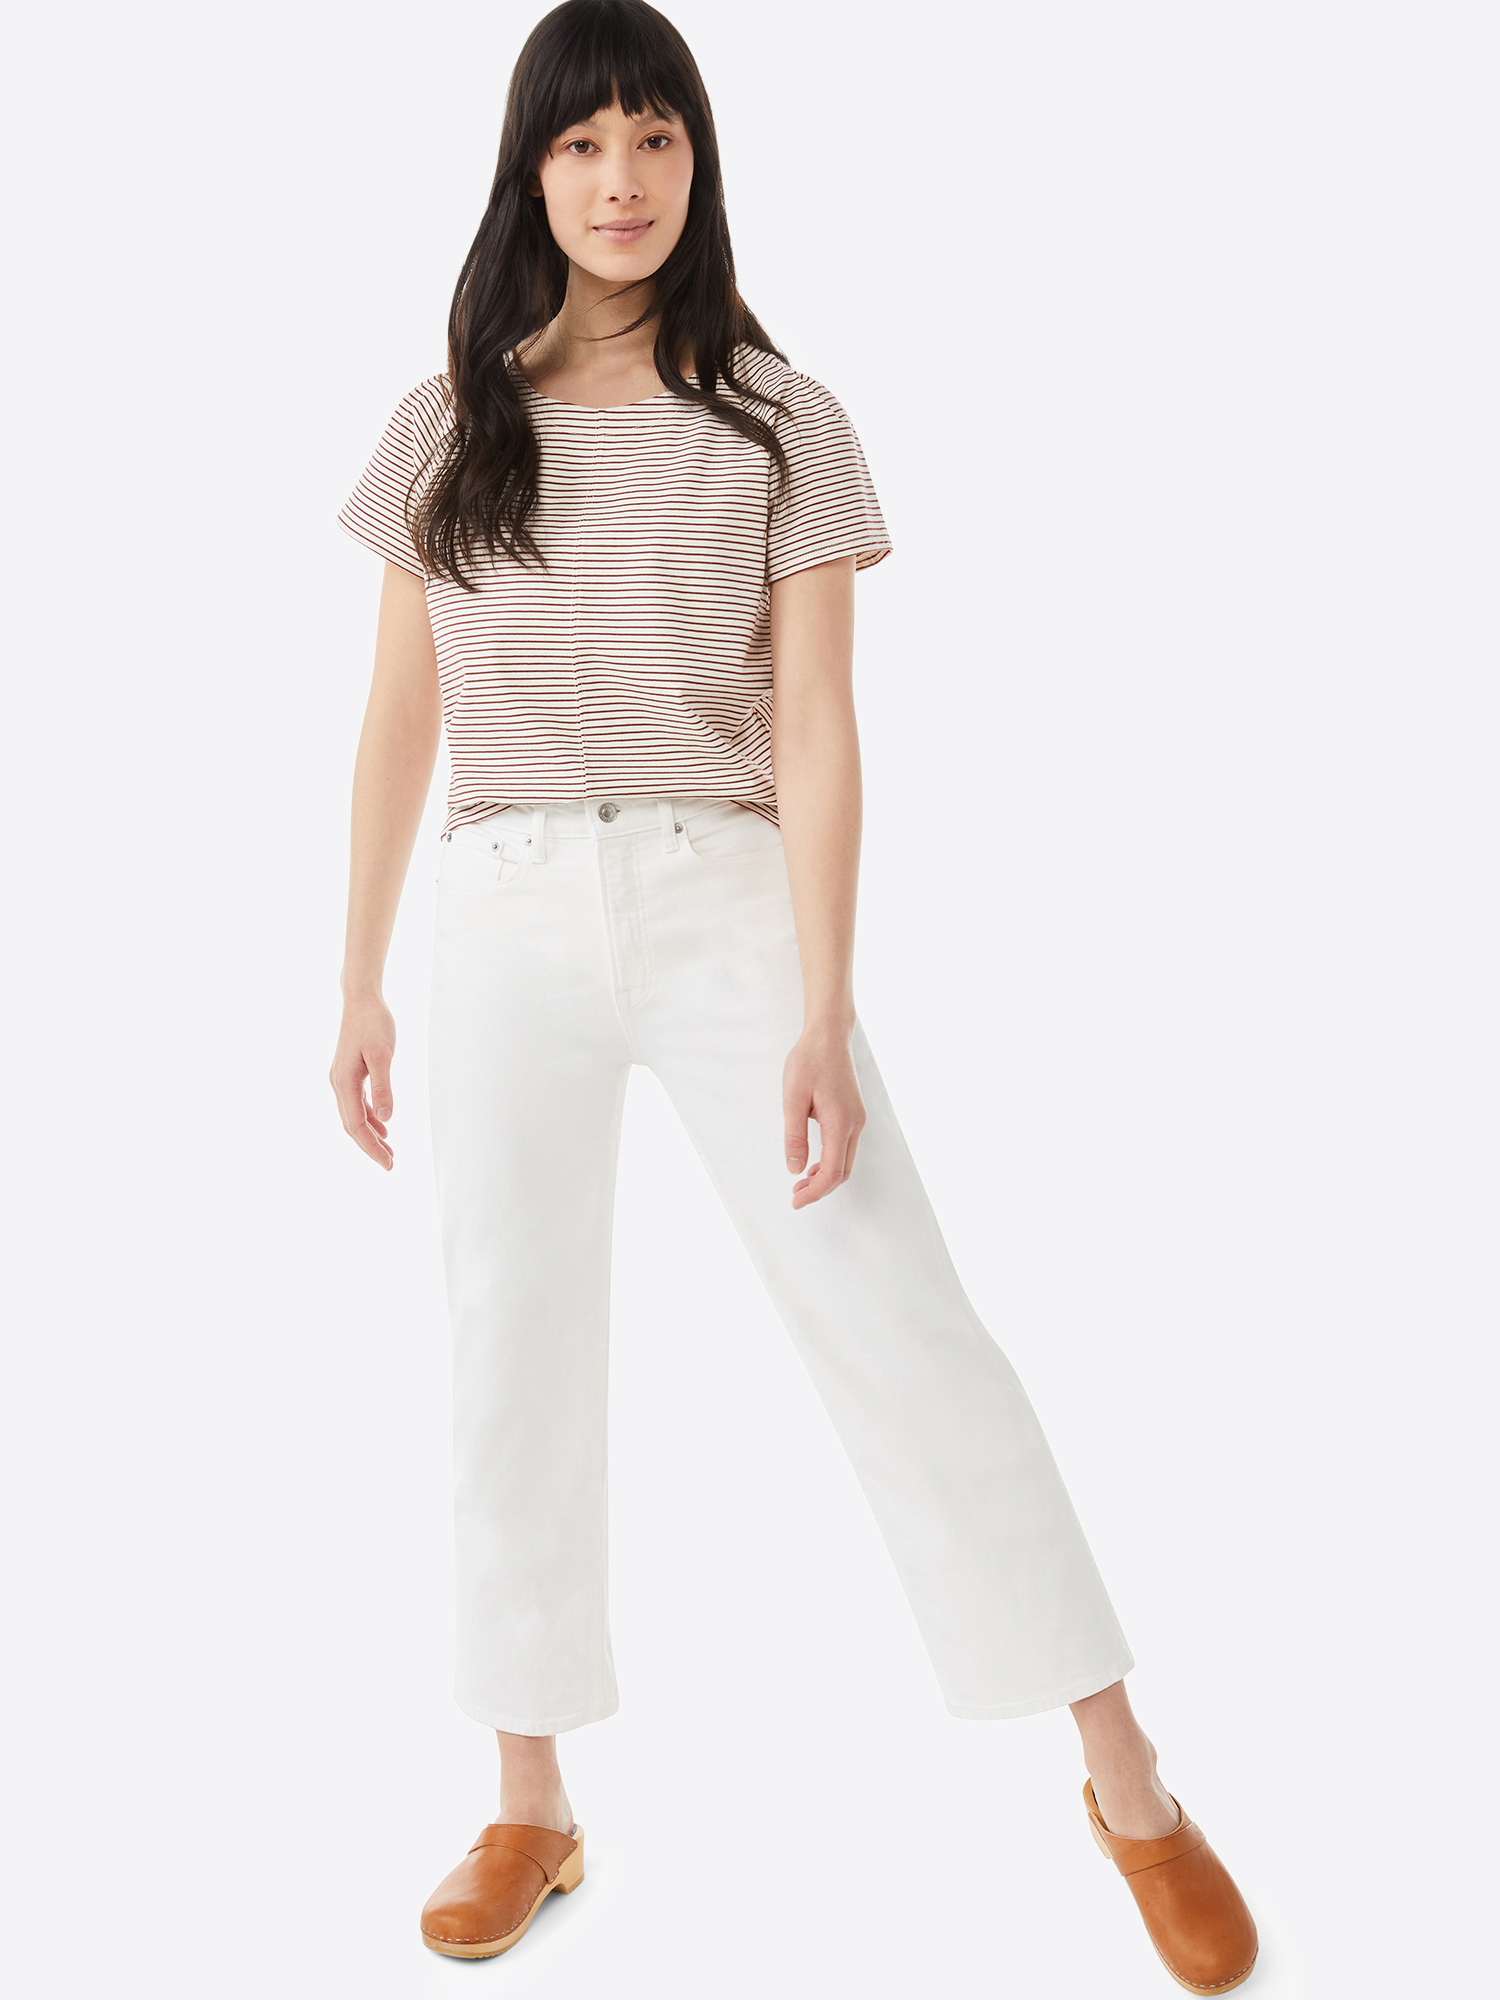 Free Assembly Women's Cropped Wide Straight Jeans - image 4 of 7